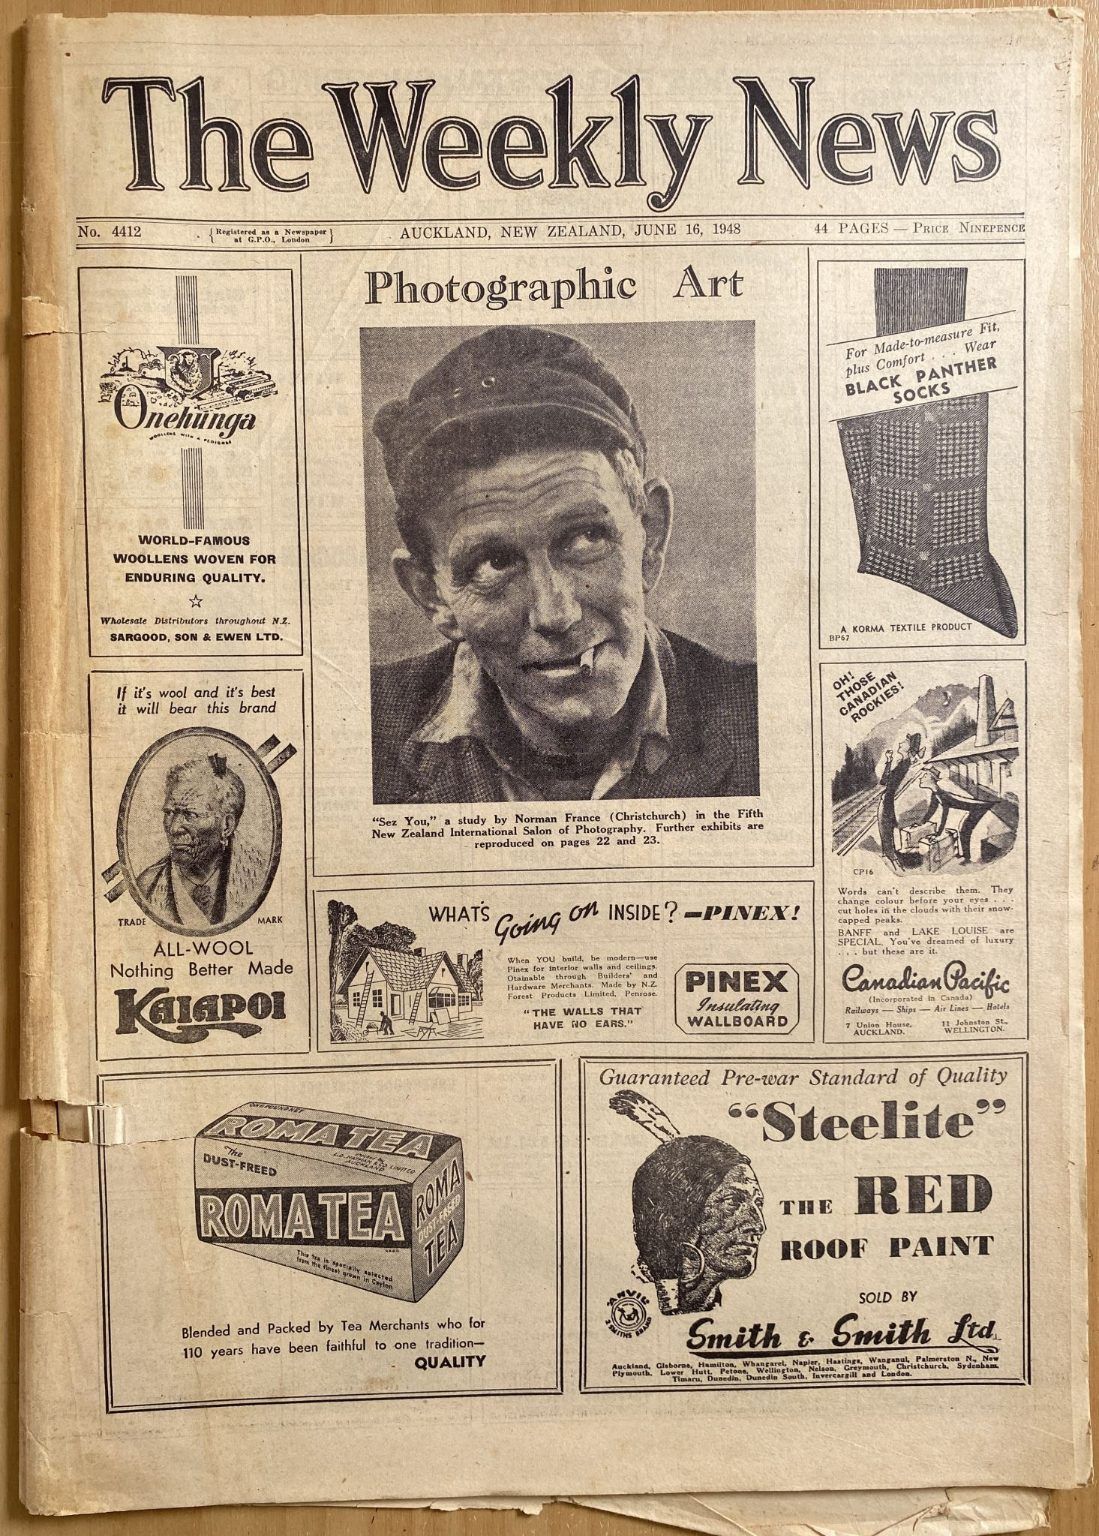 OLD NEWSPAPER: The Weekly News - No. 4412, 16 June 1948